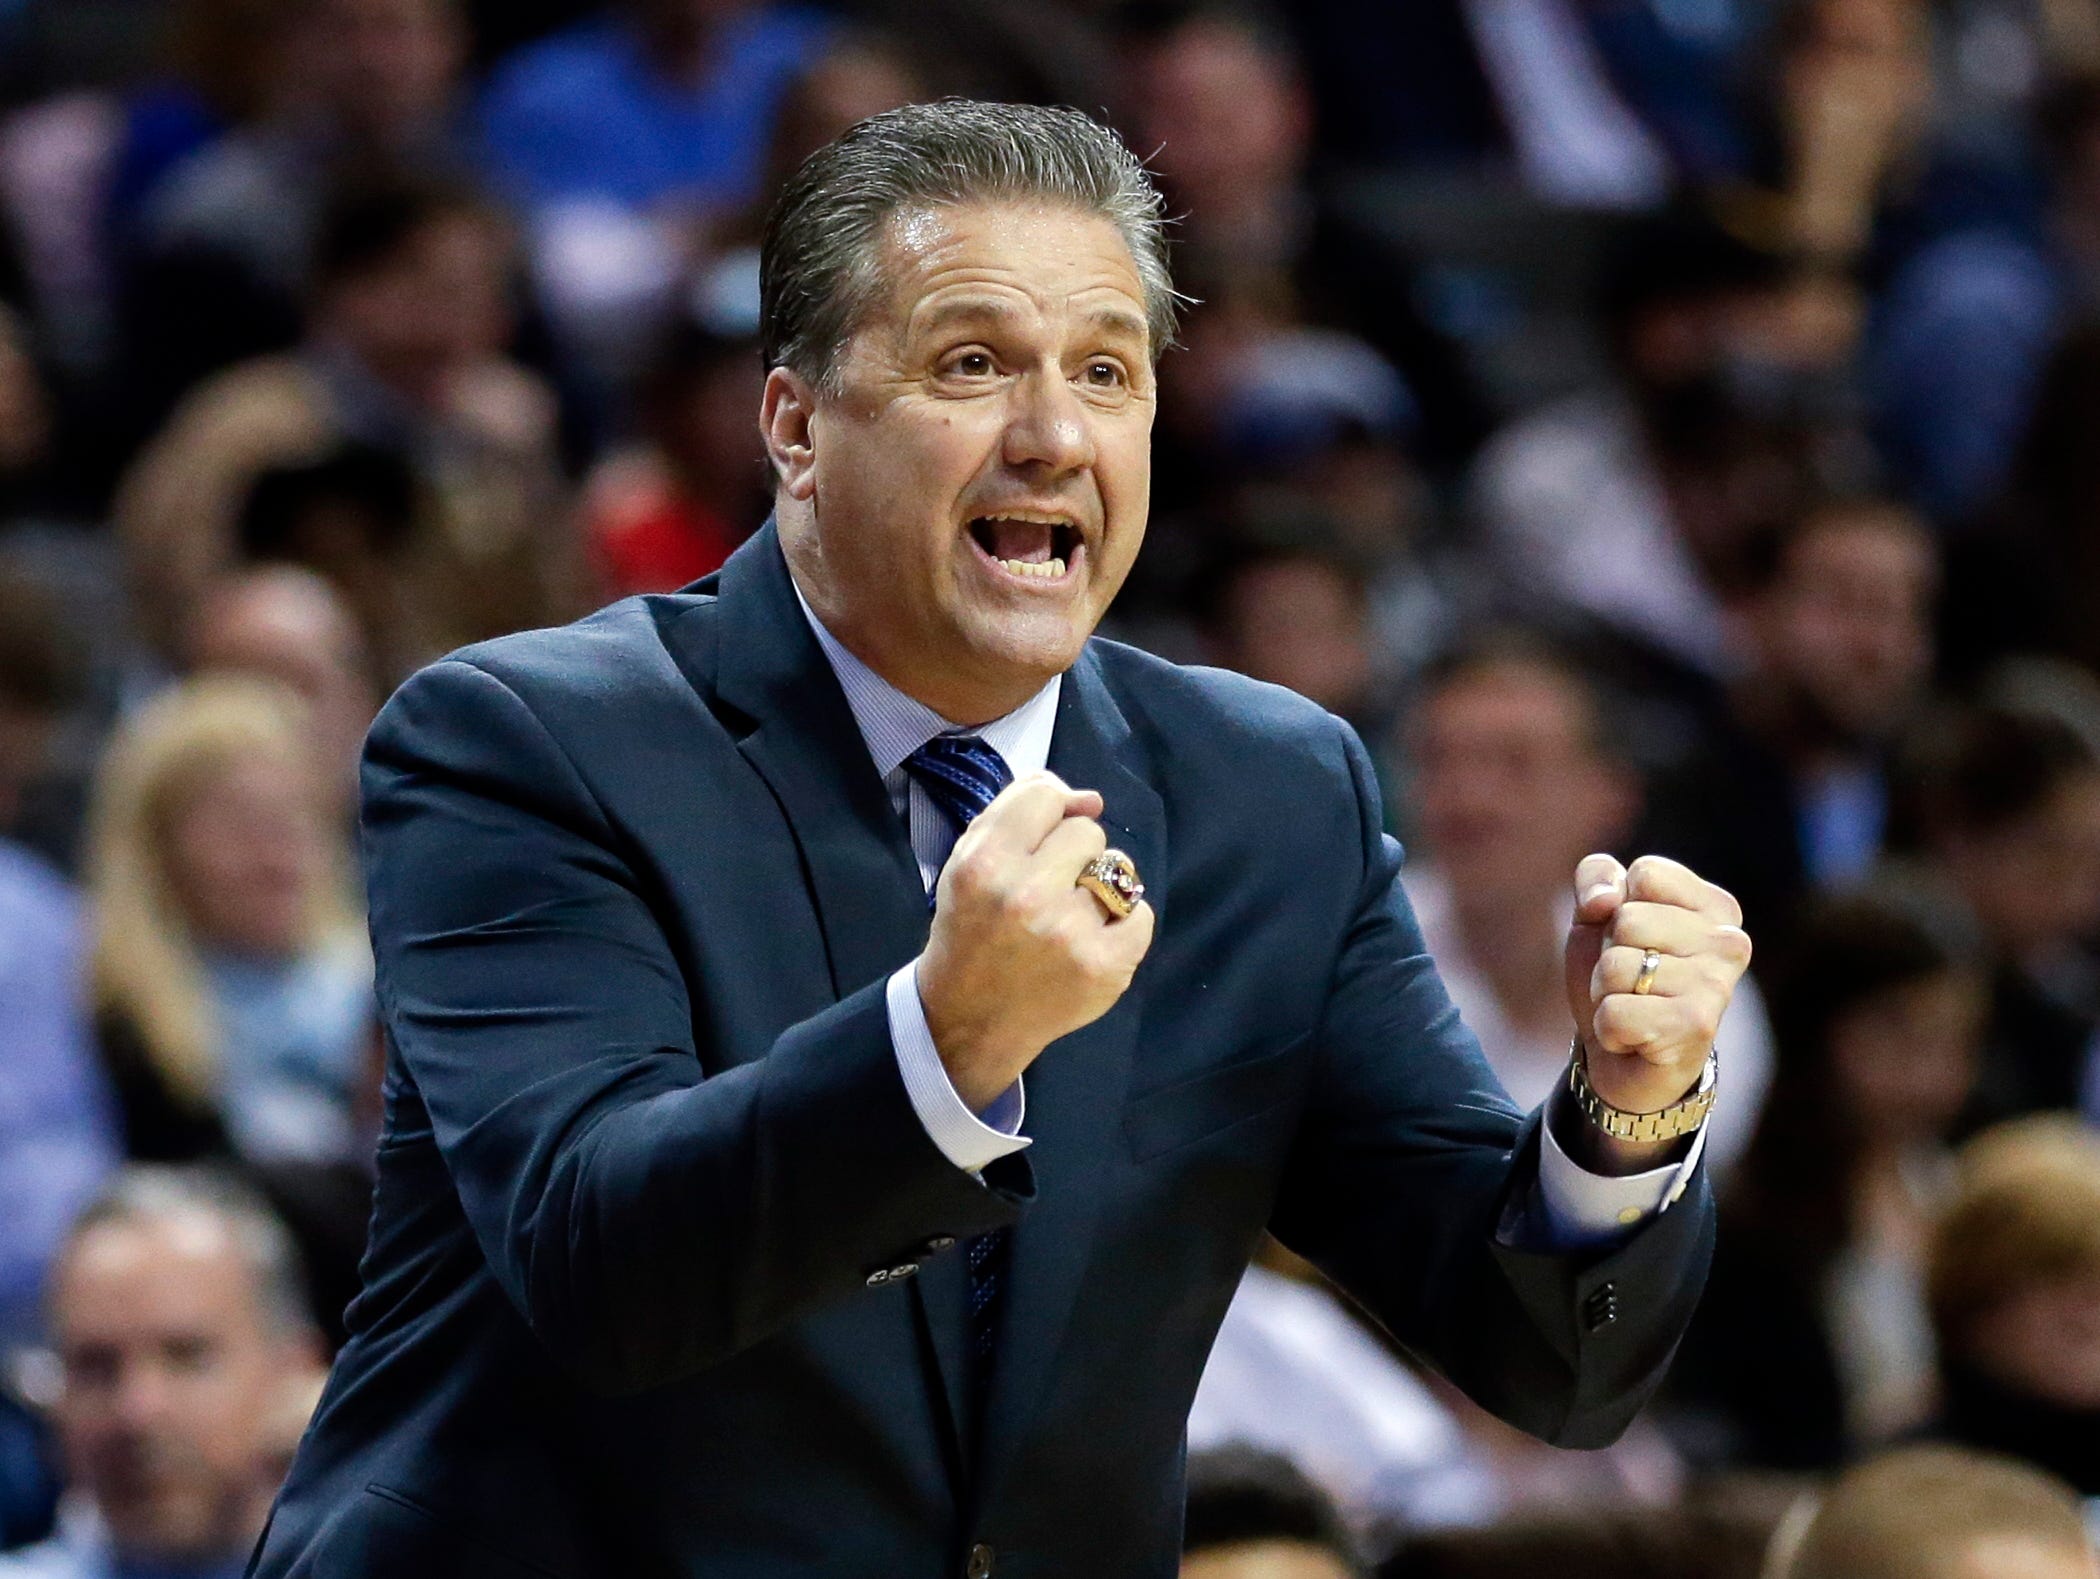 Kentucky head coach John Calipari calls out to his team during the first half of an NCAA college basketball game against Ohio State Saturday, Dec. 19, 2015, in New York. (AP Photo/Frank Franklin II)